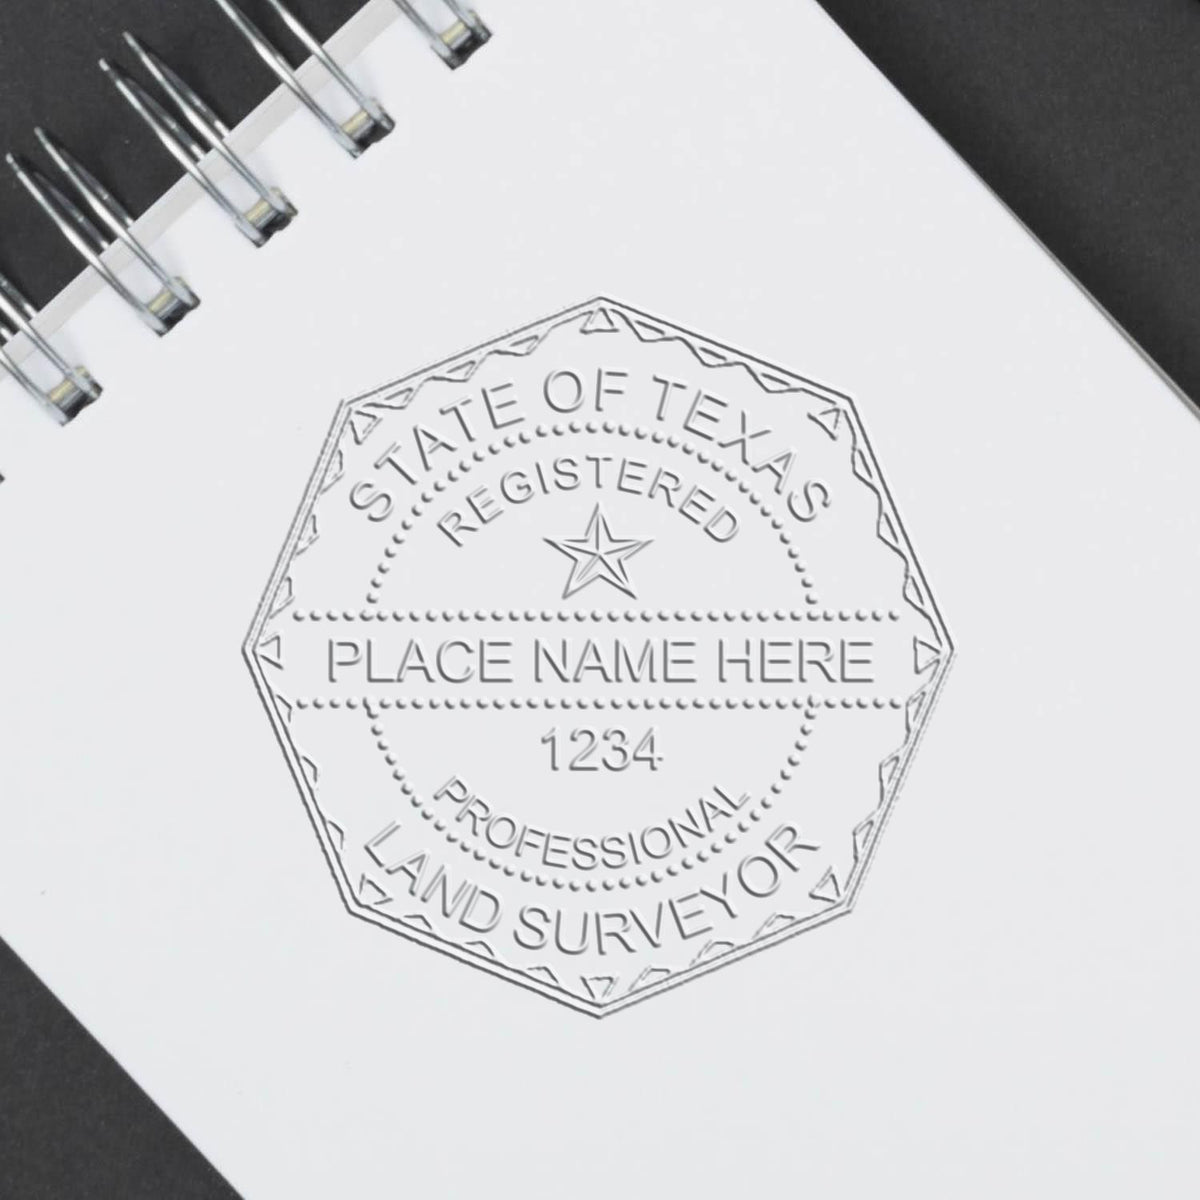 The Gift Texas Land Surveyor Seal stamp impression comes to life with a crisp, detailed image stamped on paper - showcasing true professional quality.